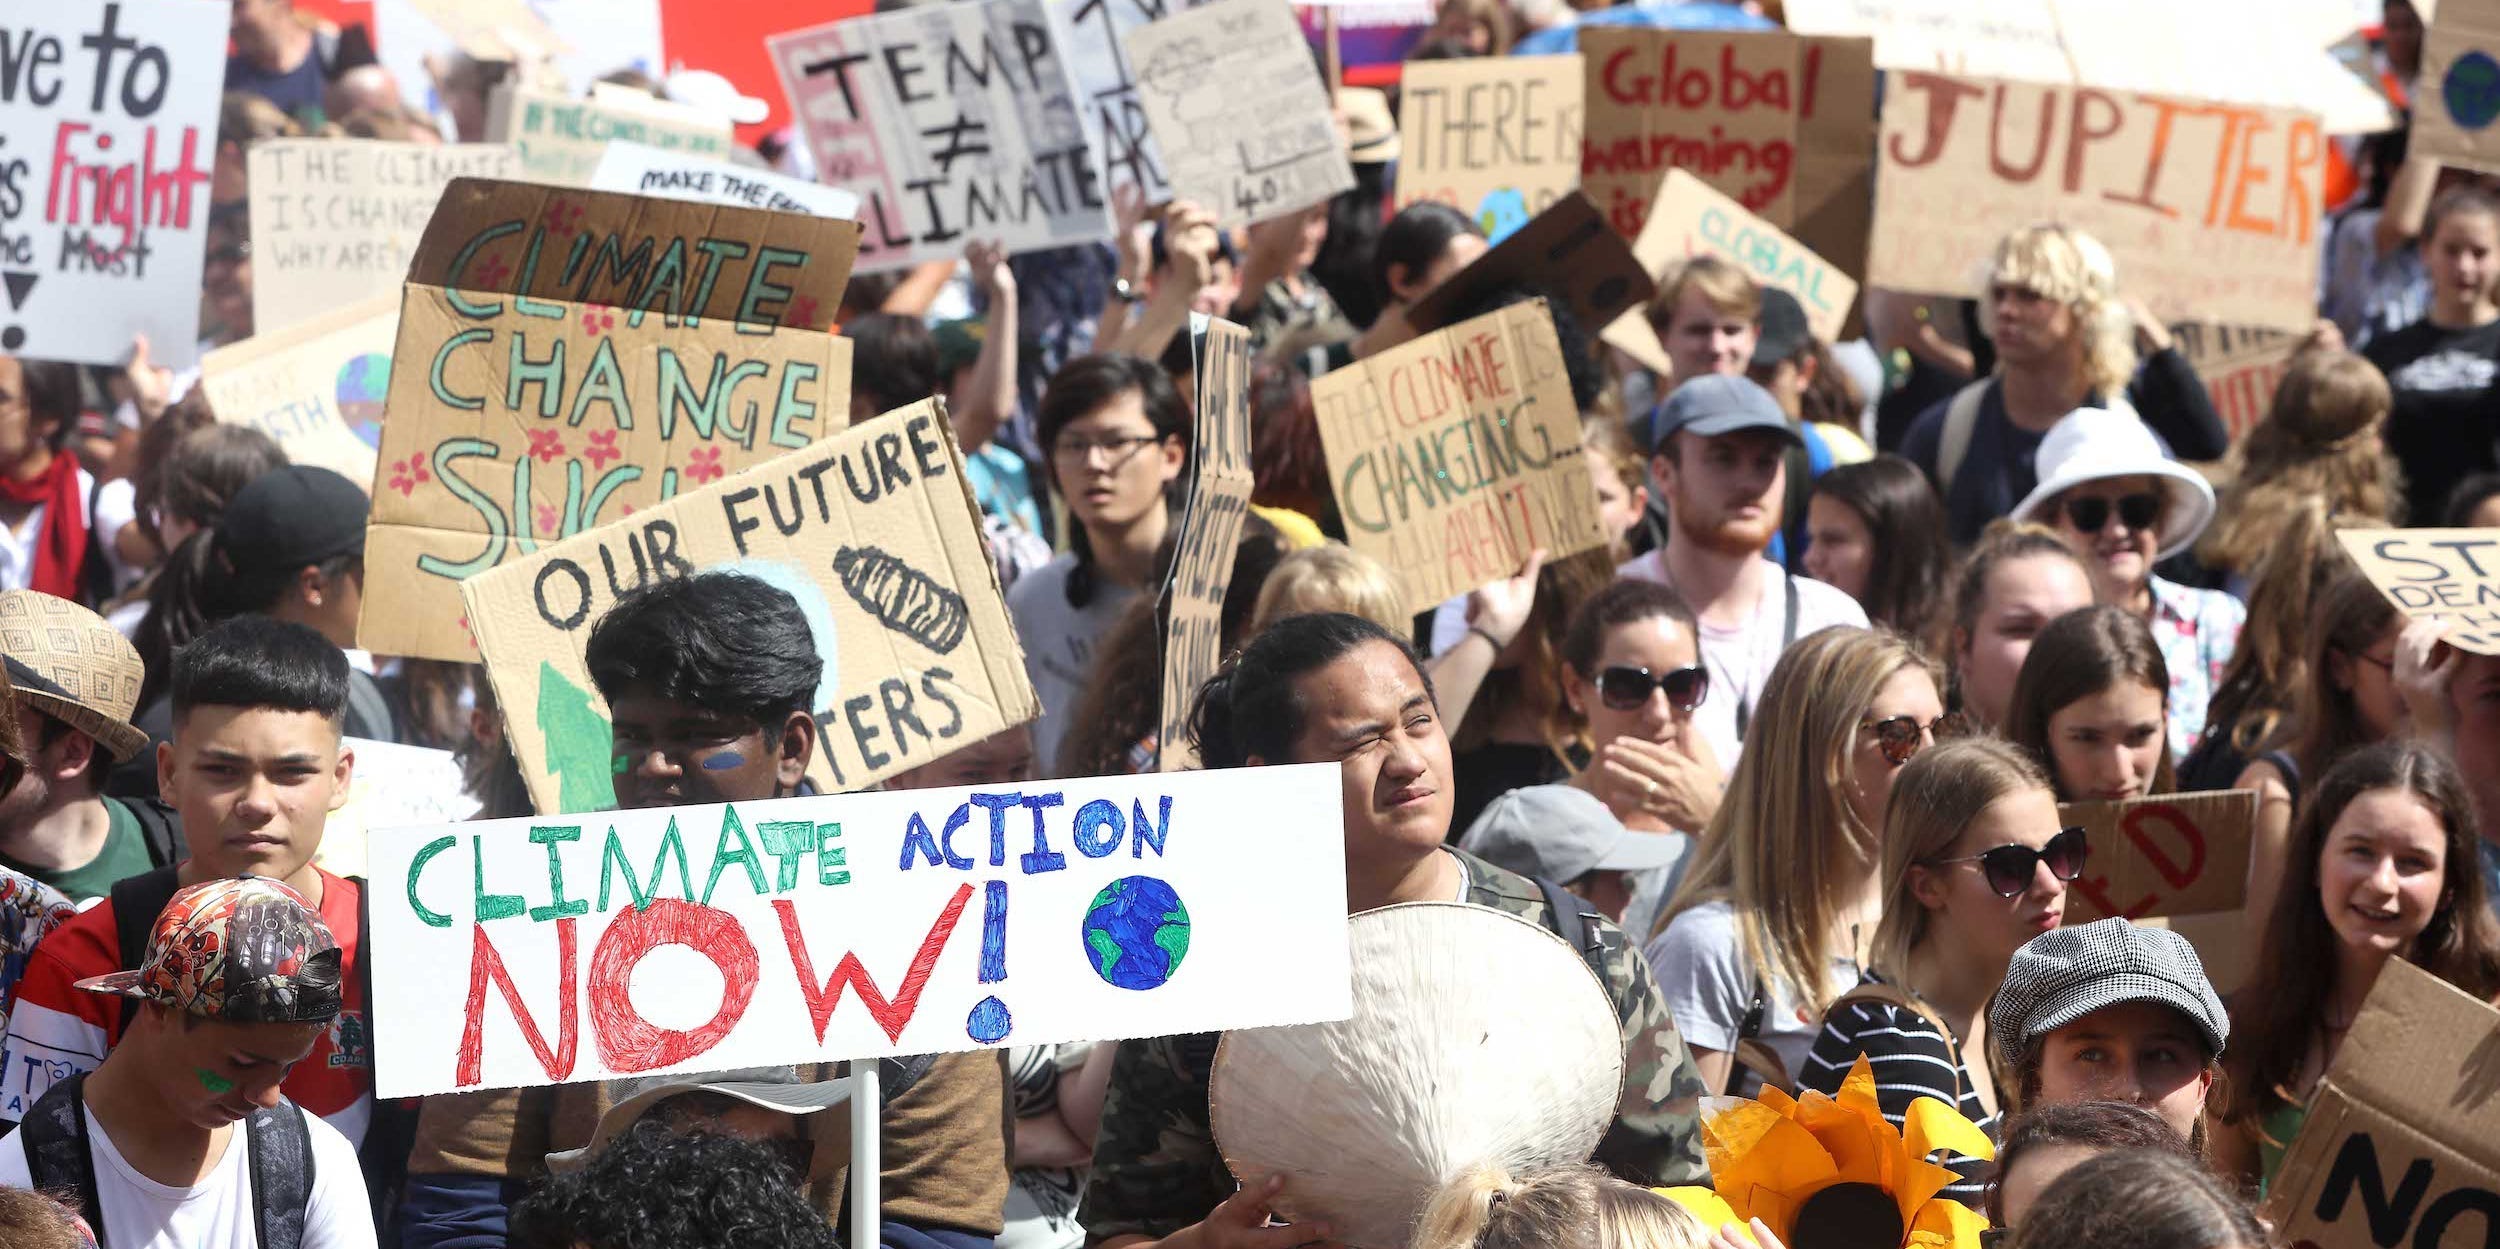 Students protest in Auckland's Aotea Square over climate change on March 15, 2019 in Auckland, New Zealand.